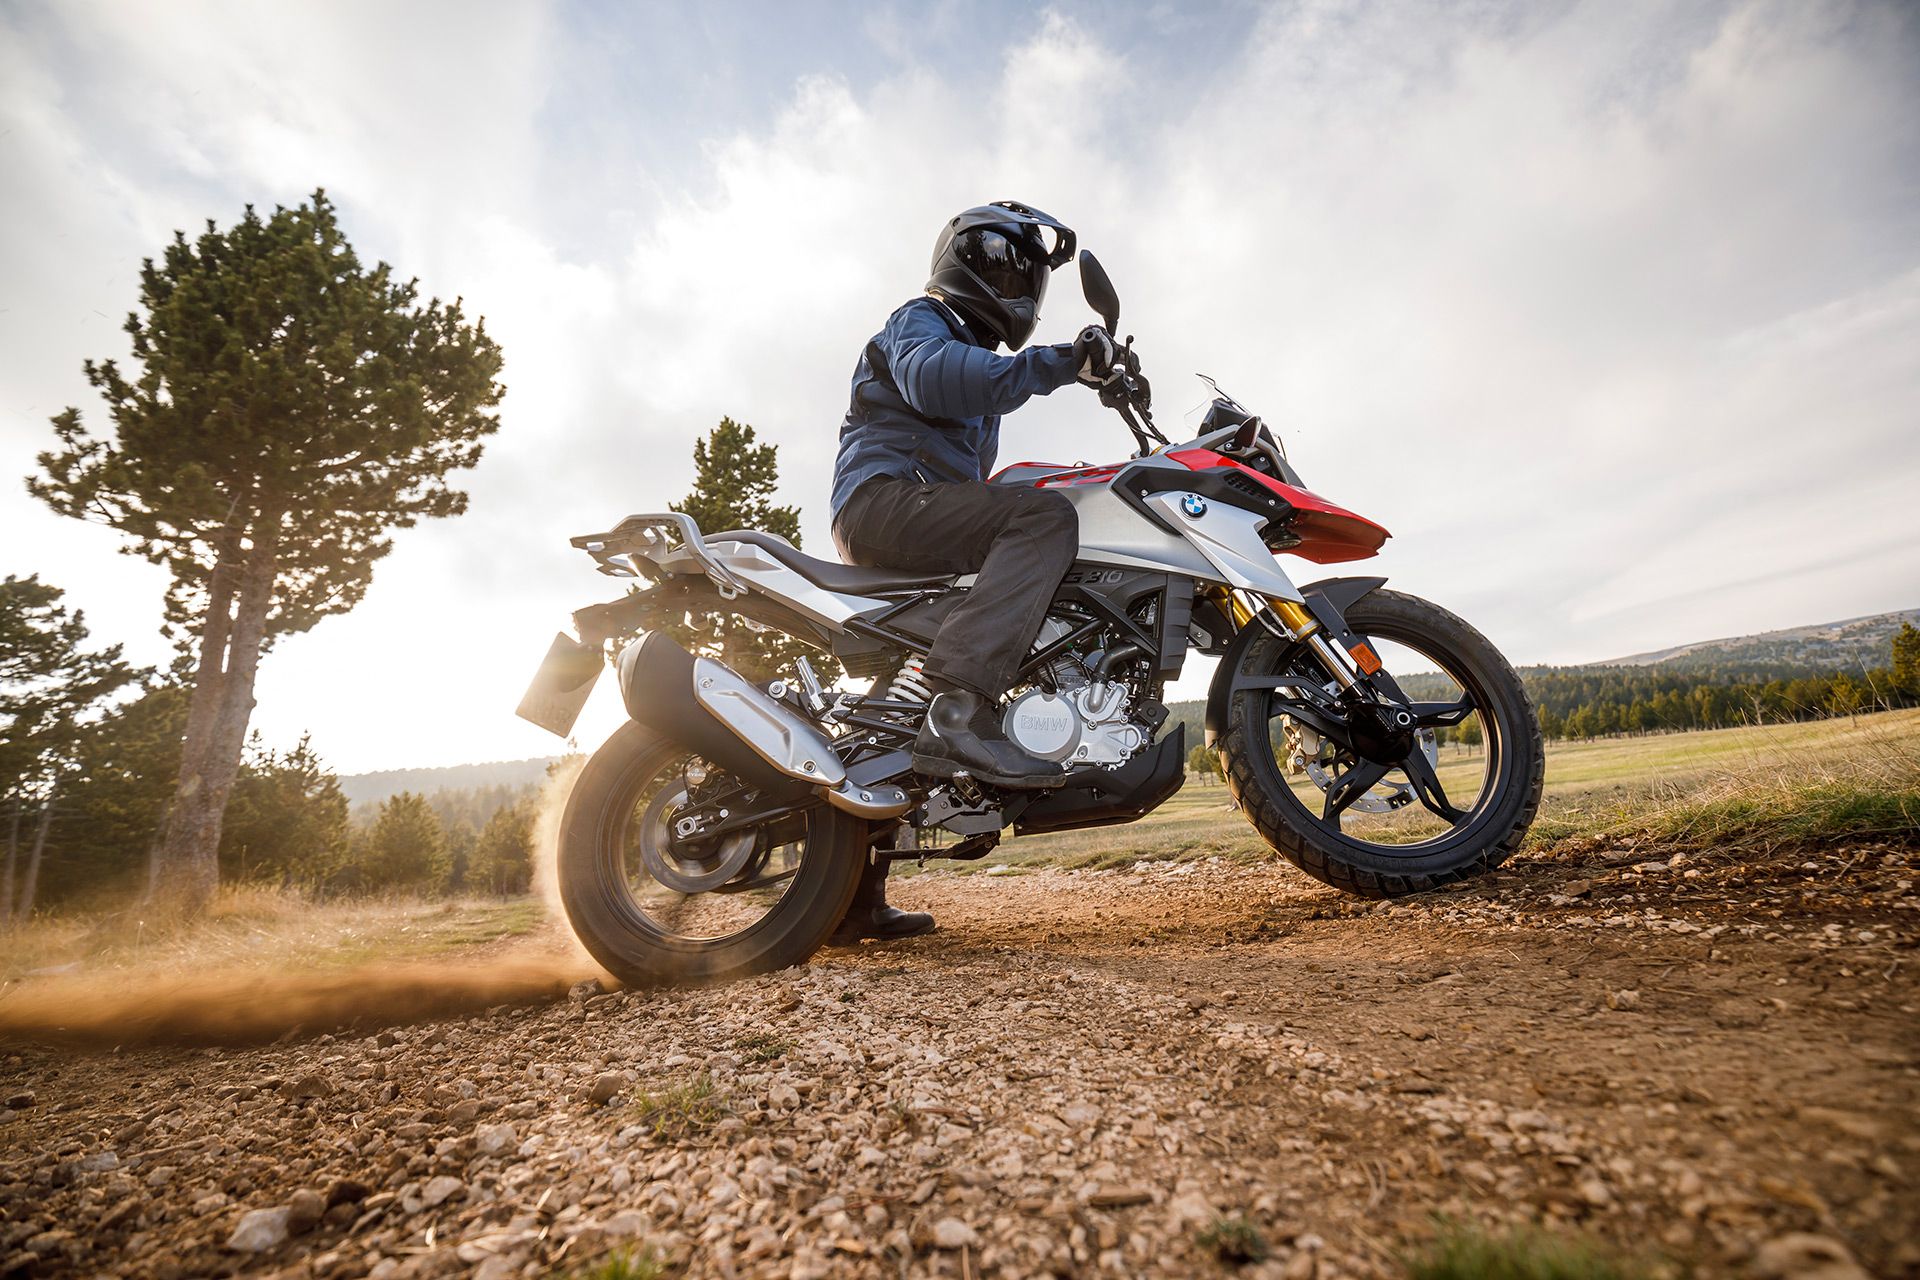 BMW G 310 GS Review Entry Level & Commuter Motorcycle